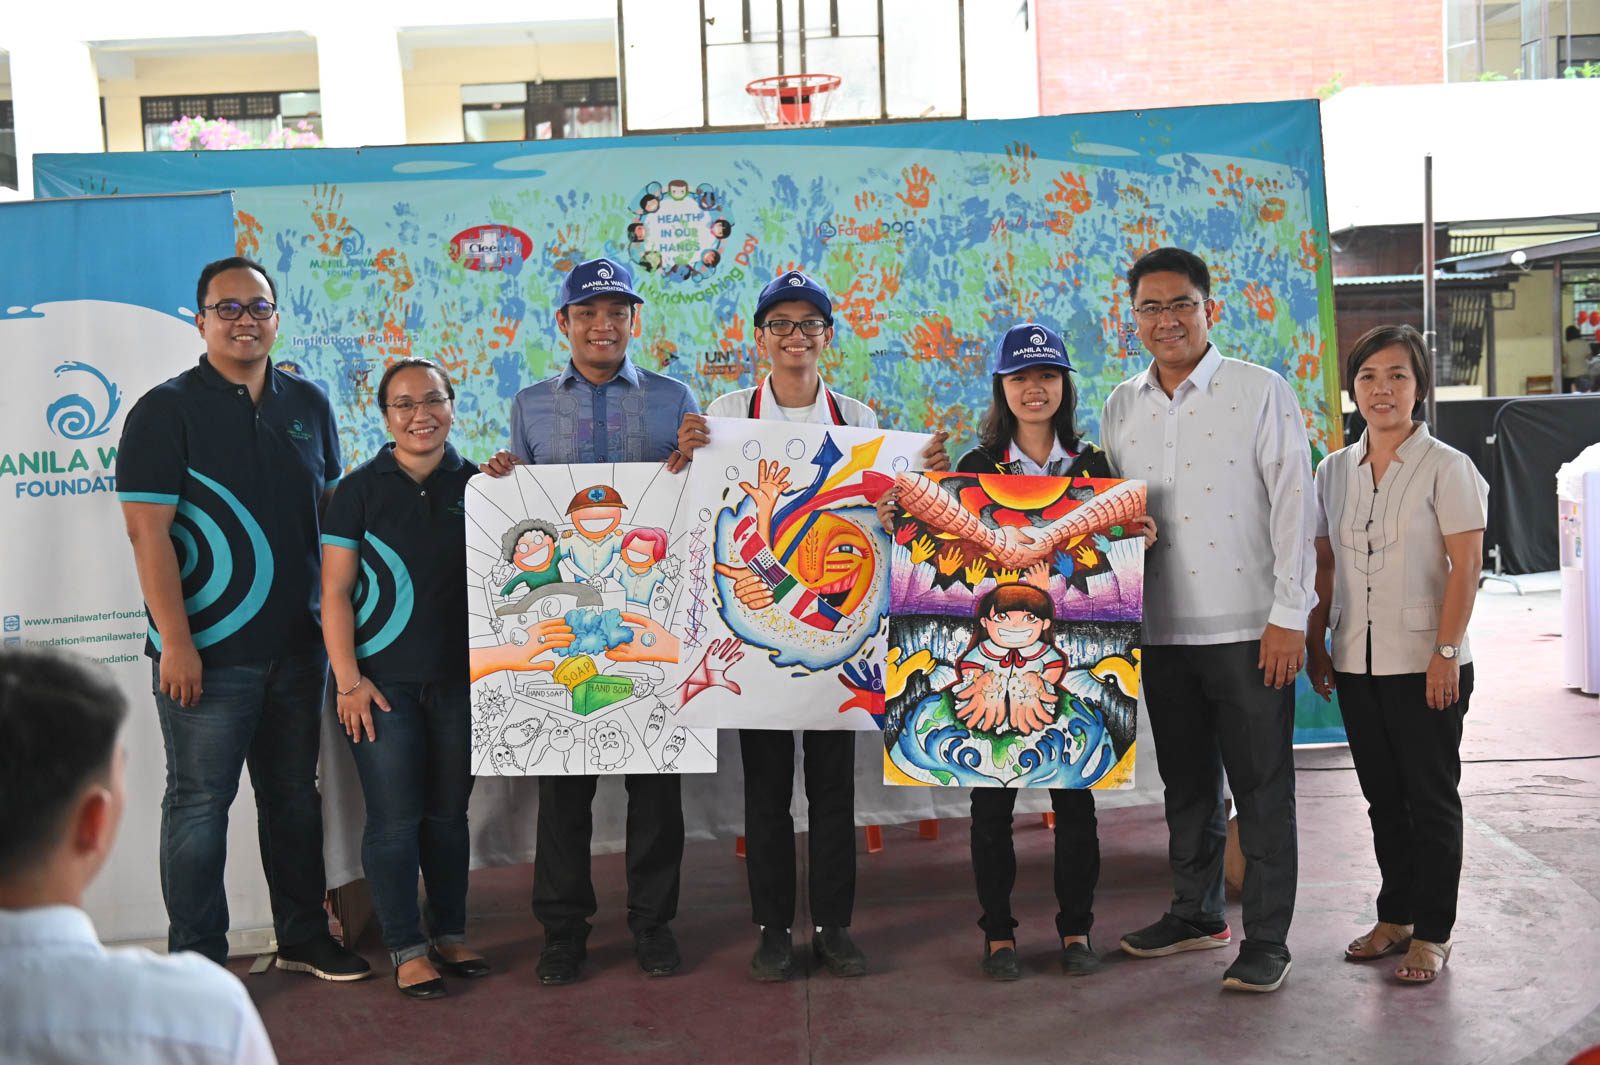 ENGAGING STUDENTS. MWF chose 3 winners out of the 23 students who joined the poster-making contest. 